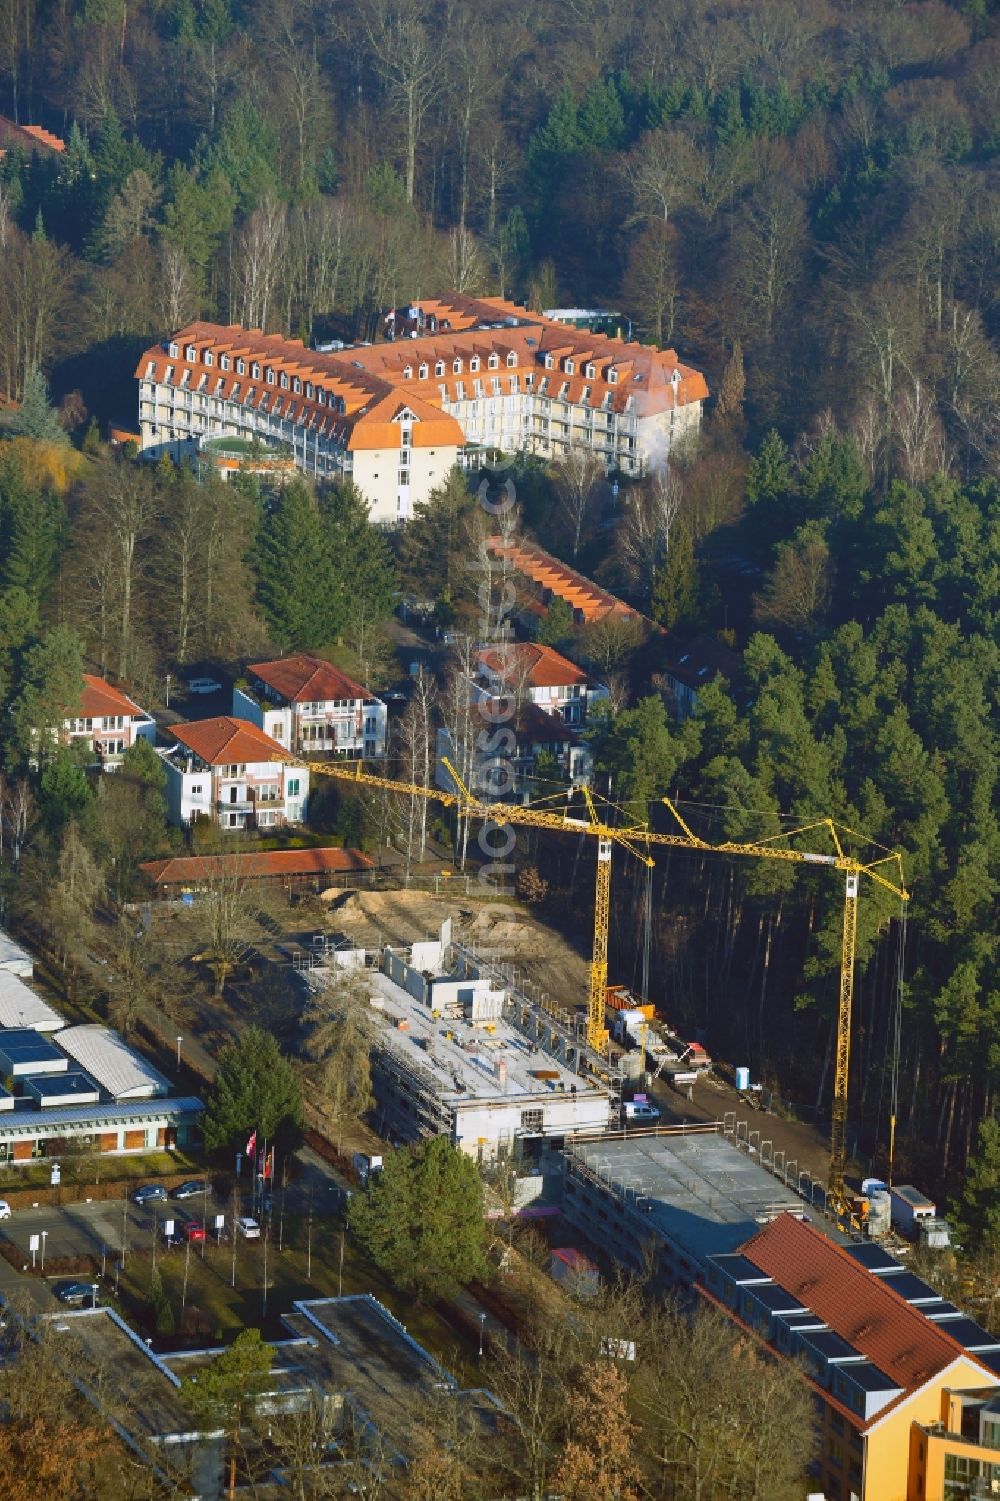 Wandlitz from above - Construction site of a new build retirement home on Kurallee in the district Waldsiedlung in Wandlitz in the state Brandenburg, Germany